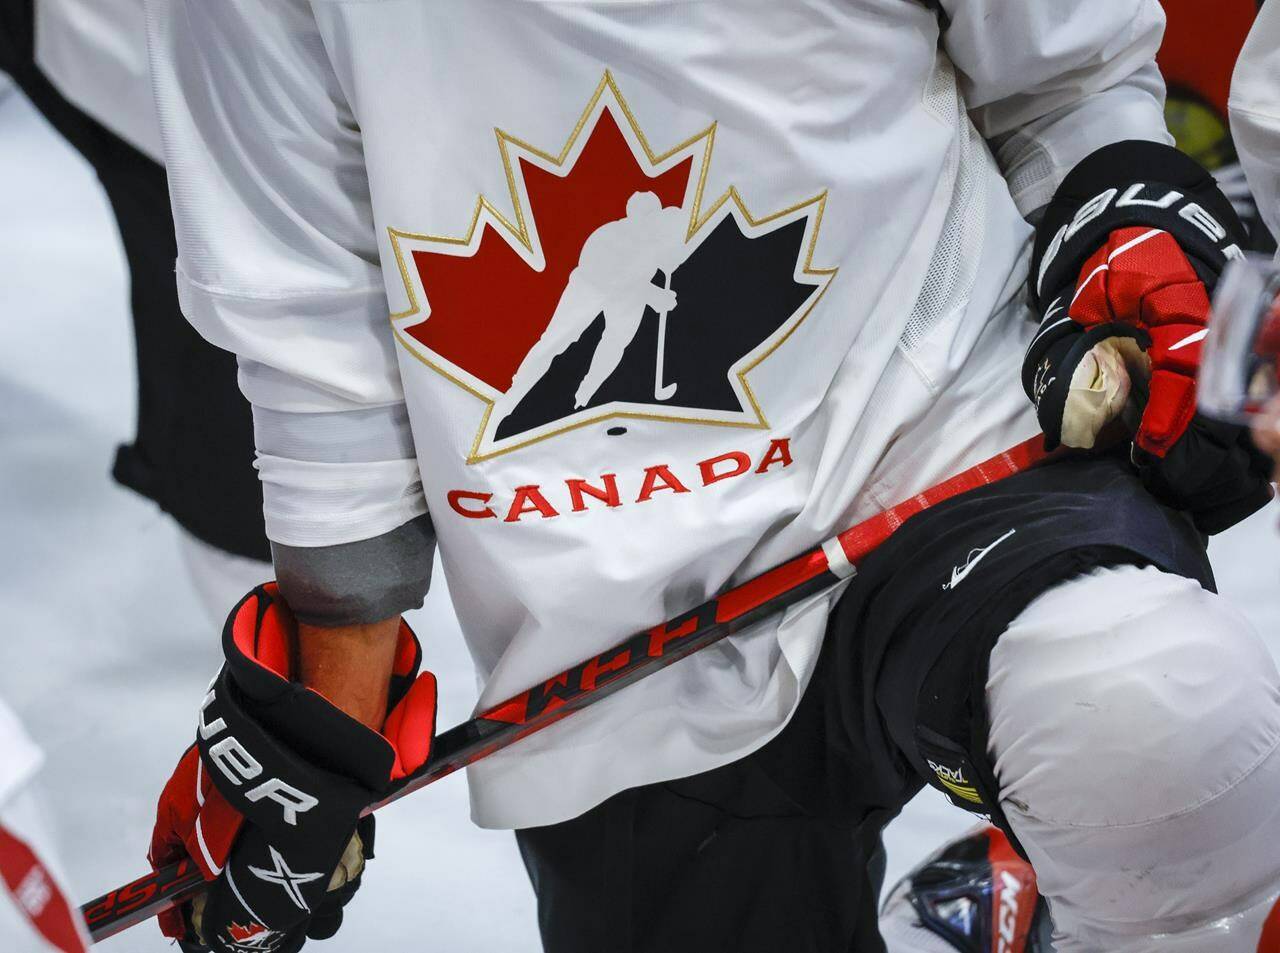 A Hockey Canada logo is shown on the jersey of a player with Canada’s National Junior Team during a training camp practice in Calgary, Alta., Tuesday, Aug. 2, 2022. Nike has suspended its partnership with and paused support for Hockey Canada as the sports organization faces increasing pressure to handle alleged sexual assaults. THE CANADIAN PRESS/Jeff McIntosh